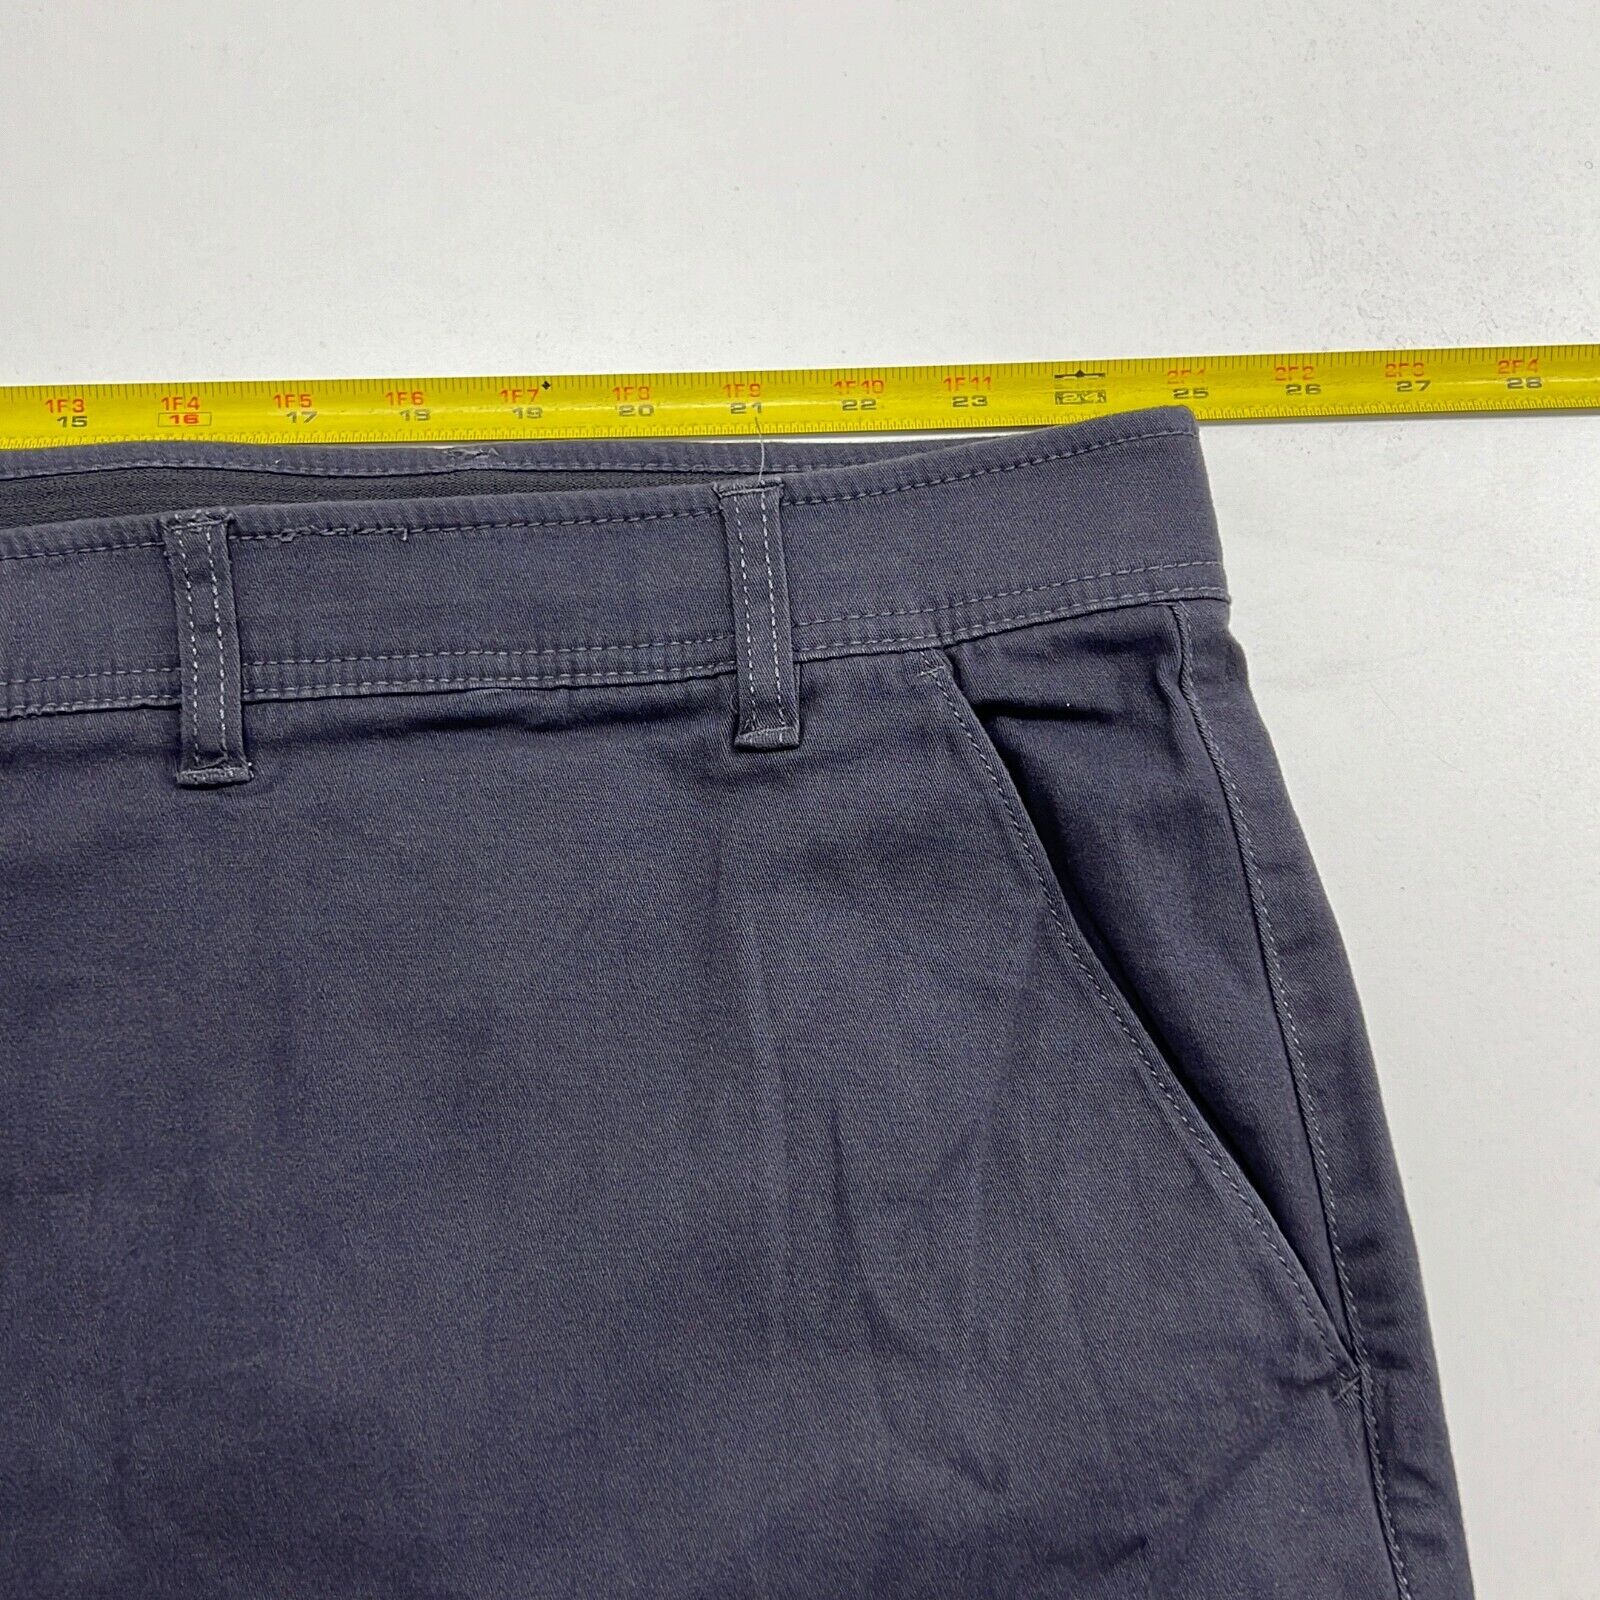 Comfort Casual Men's Blue Flat Front Pockets Straight Leg Chino Pants Size 48/S